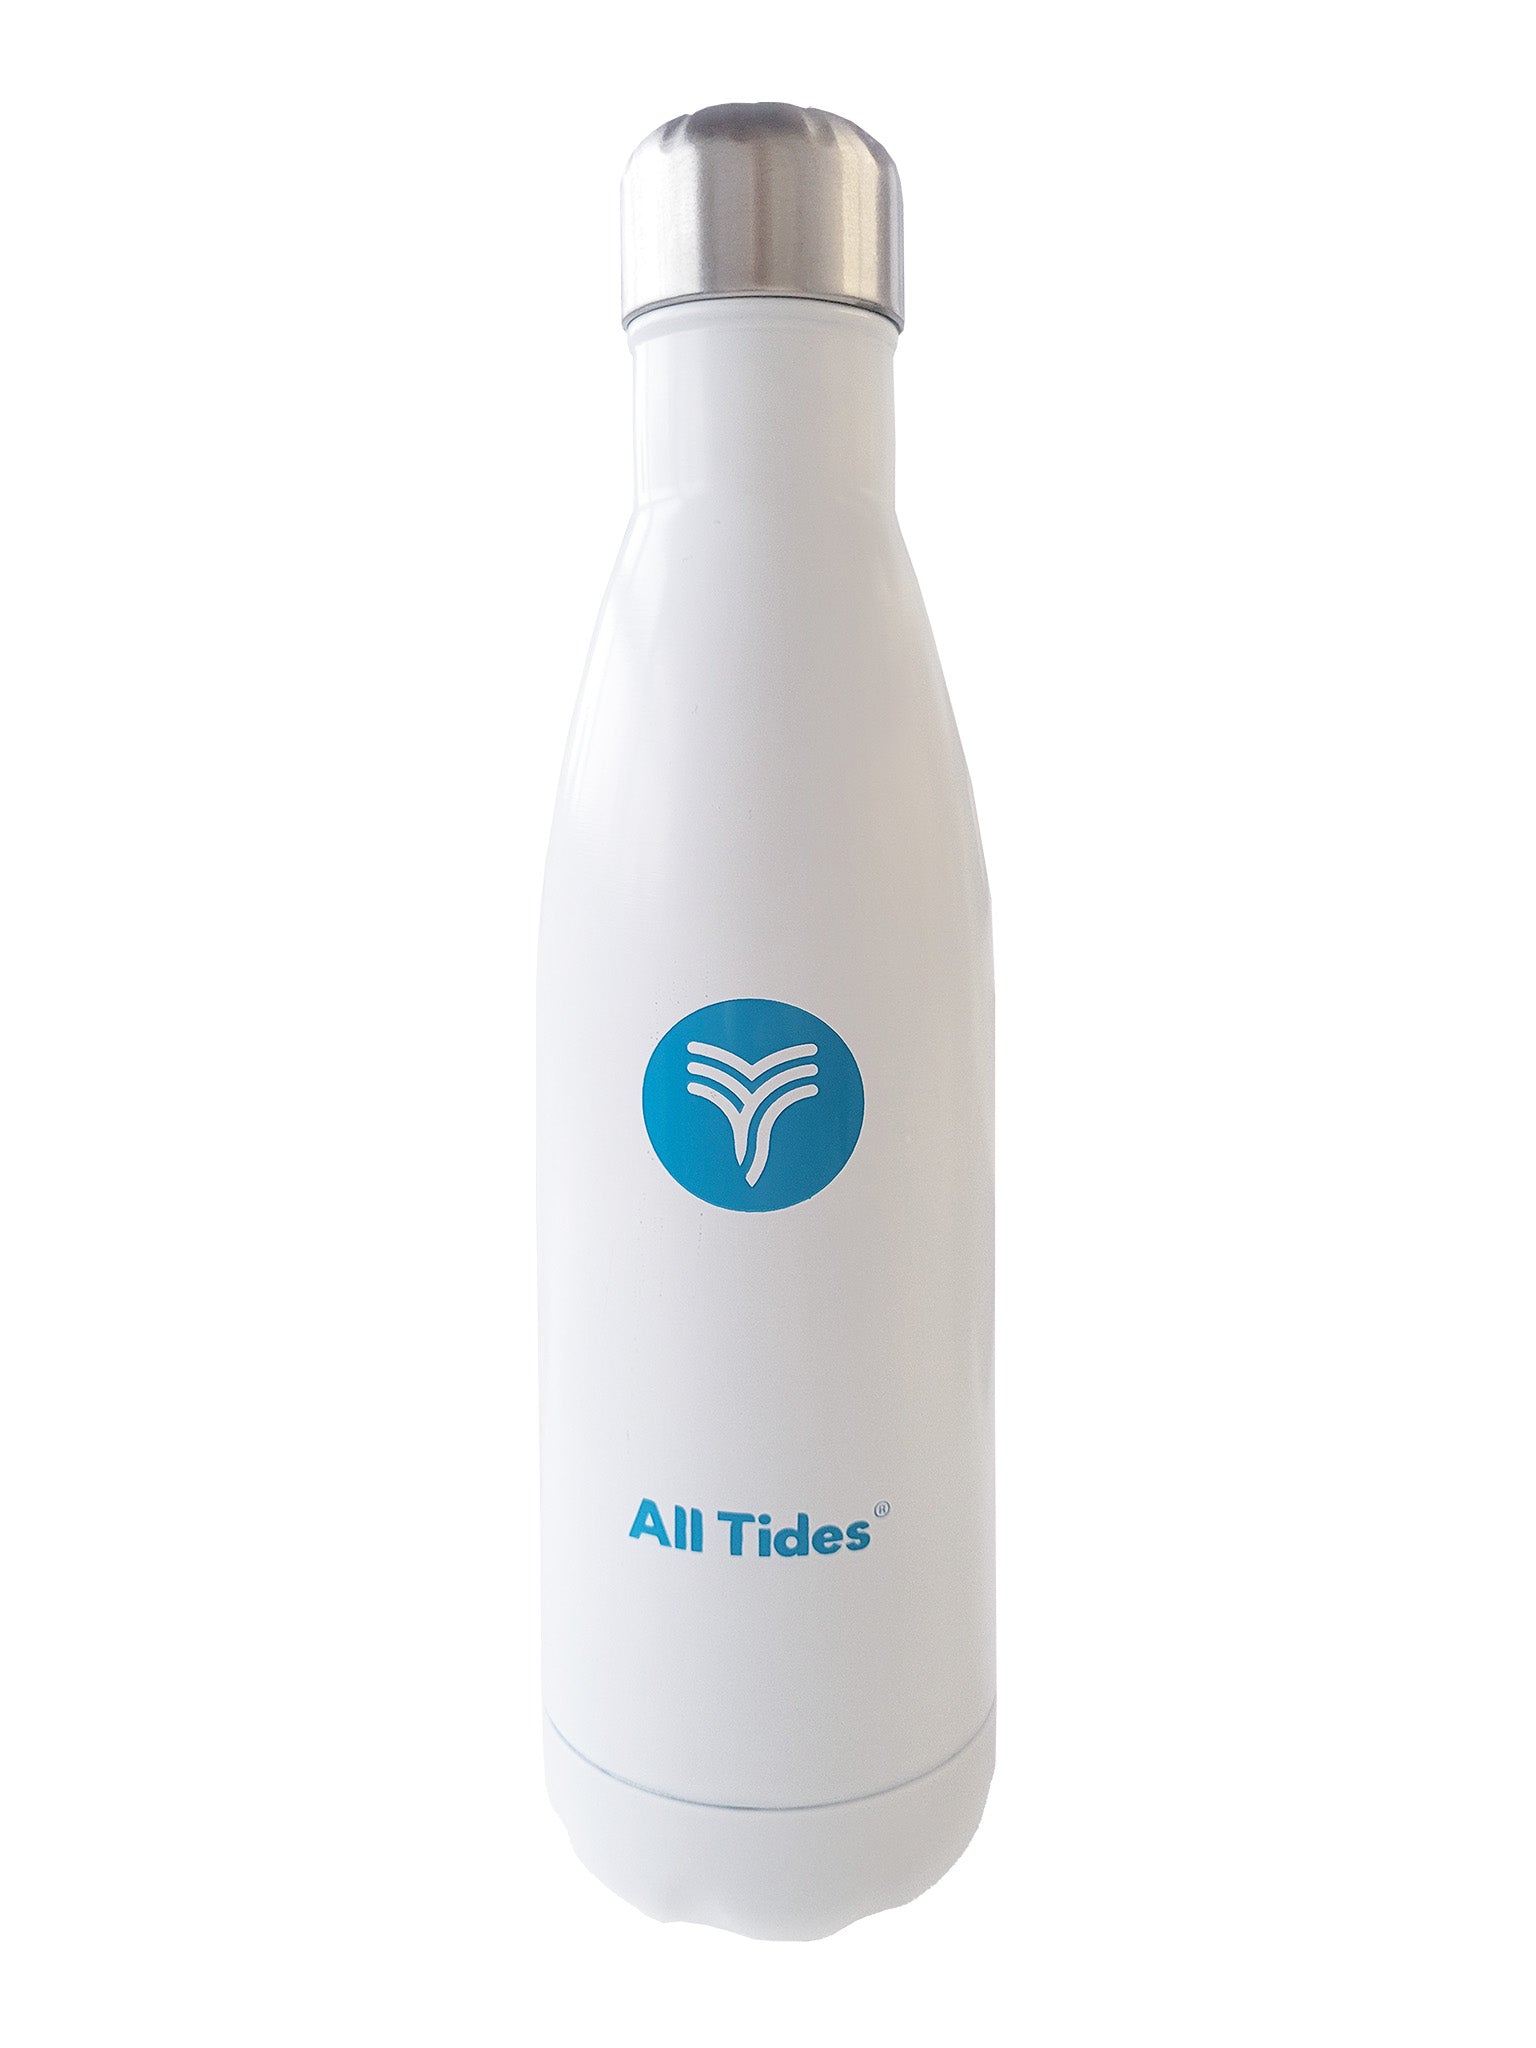 All Tides Stainless Steel Water Bottle - White